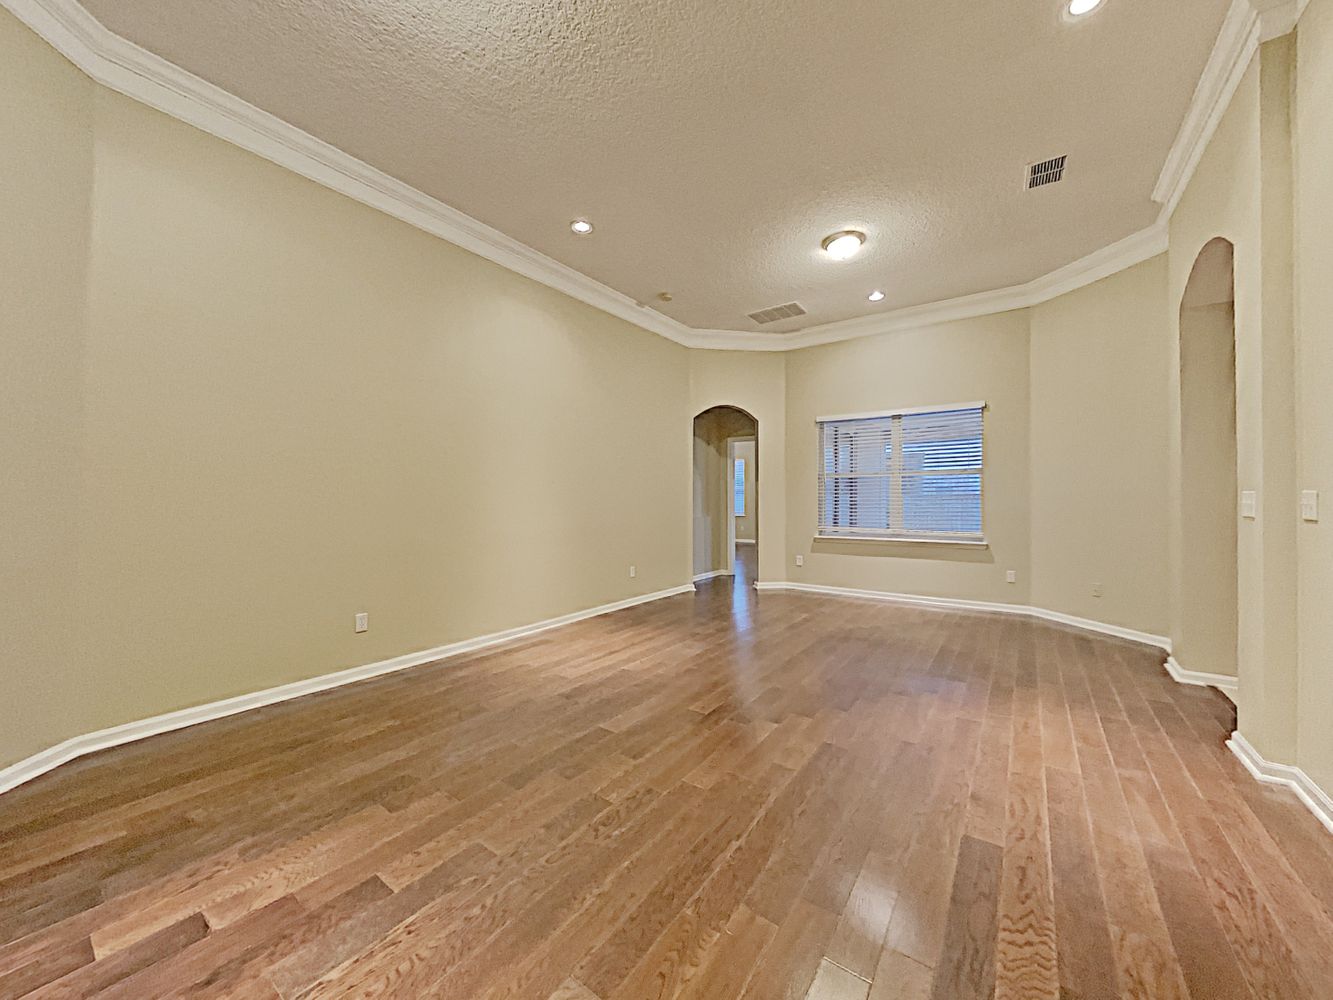 Beautiful living space with wood-style flooring at Invitation Homes Jacksonville.